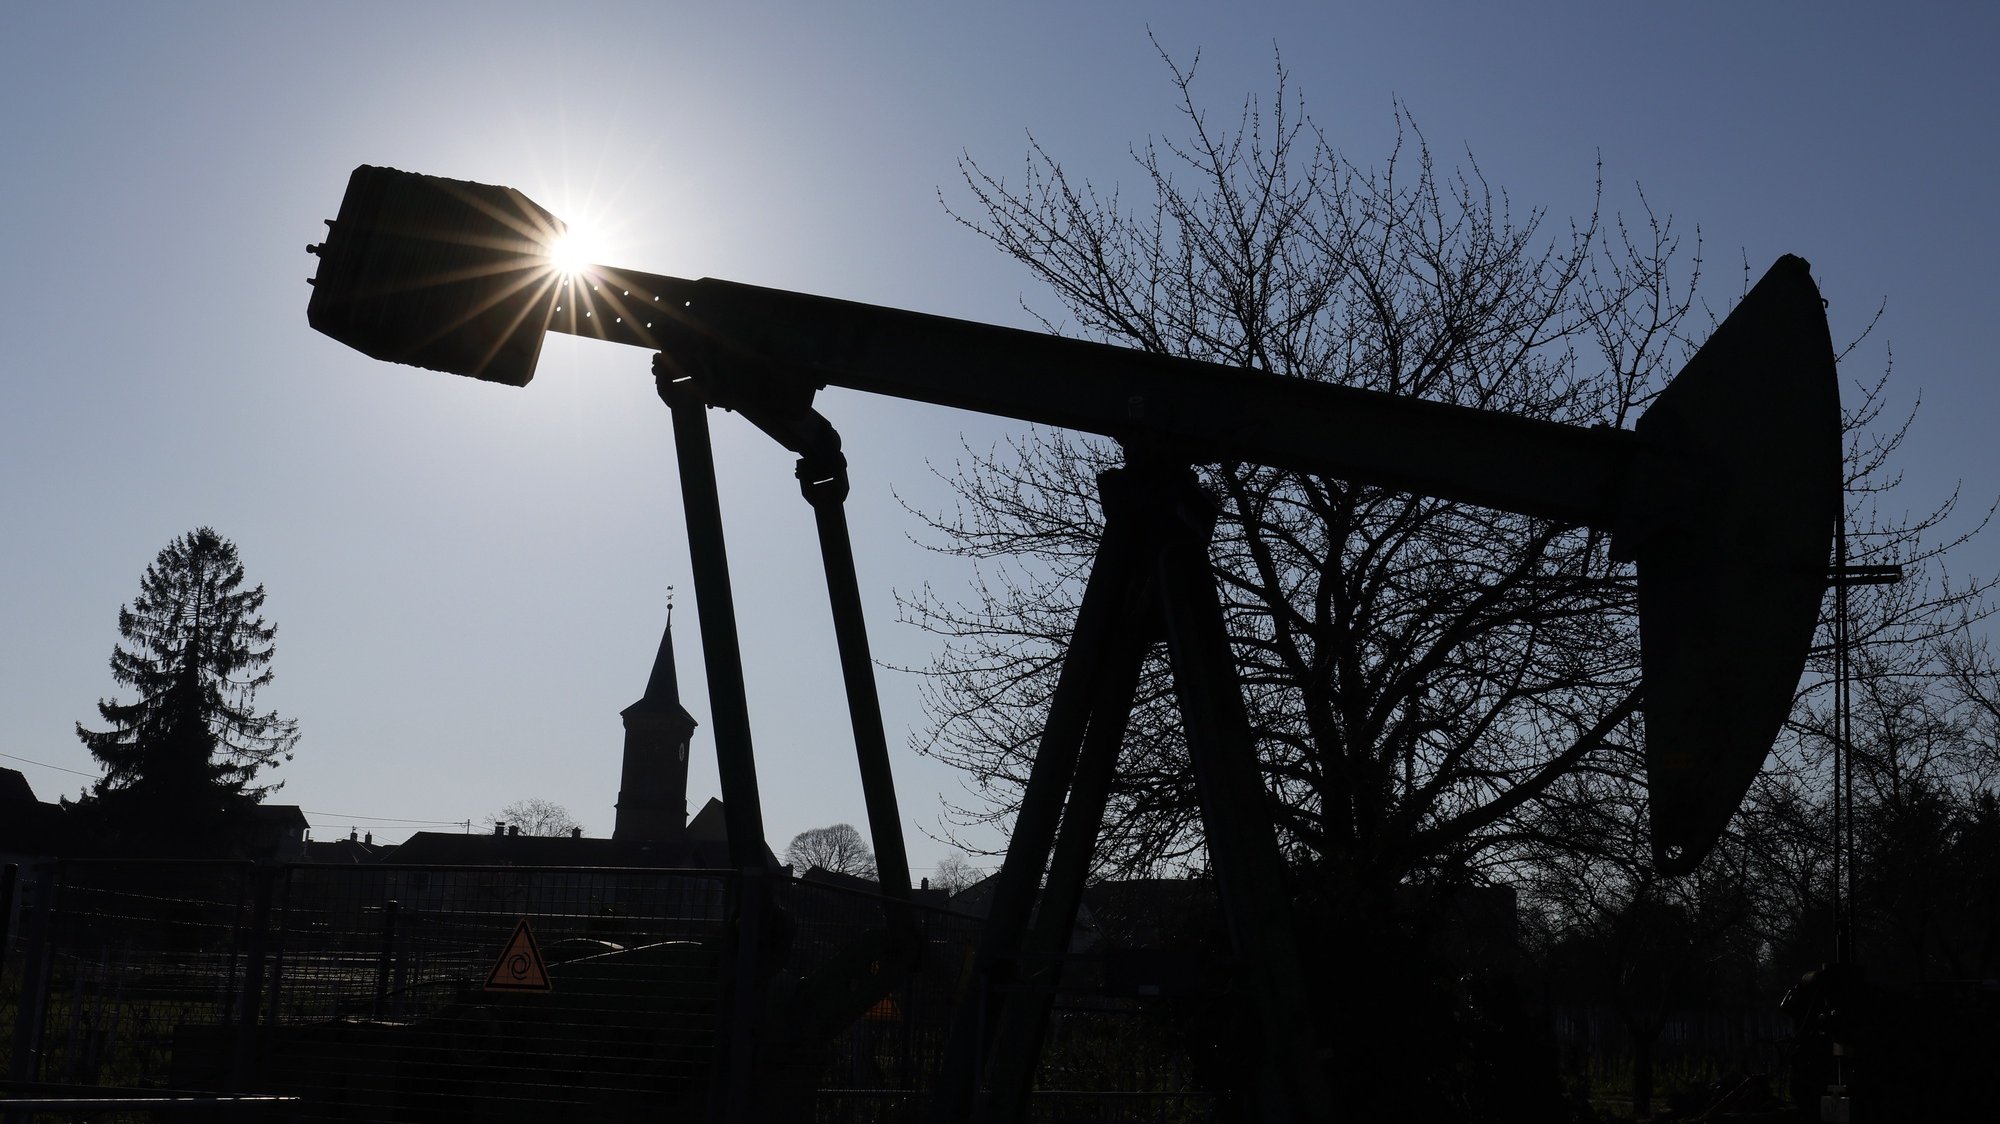 epa09842609 A view of a Crude oil pump in Walsheim near Landau, Germany, 22 March 2022. With a total production of over 4.5 million tons to date, the oil field near Landau is the largest oil field in the Upper Rhine Valley production region.  EPA/RONALD WITTEK